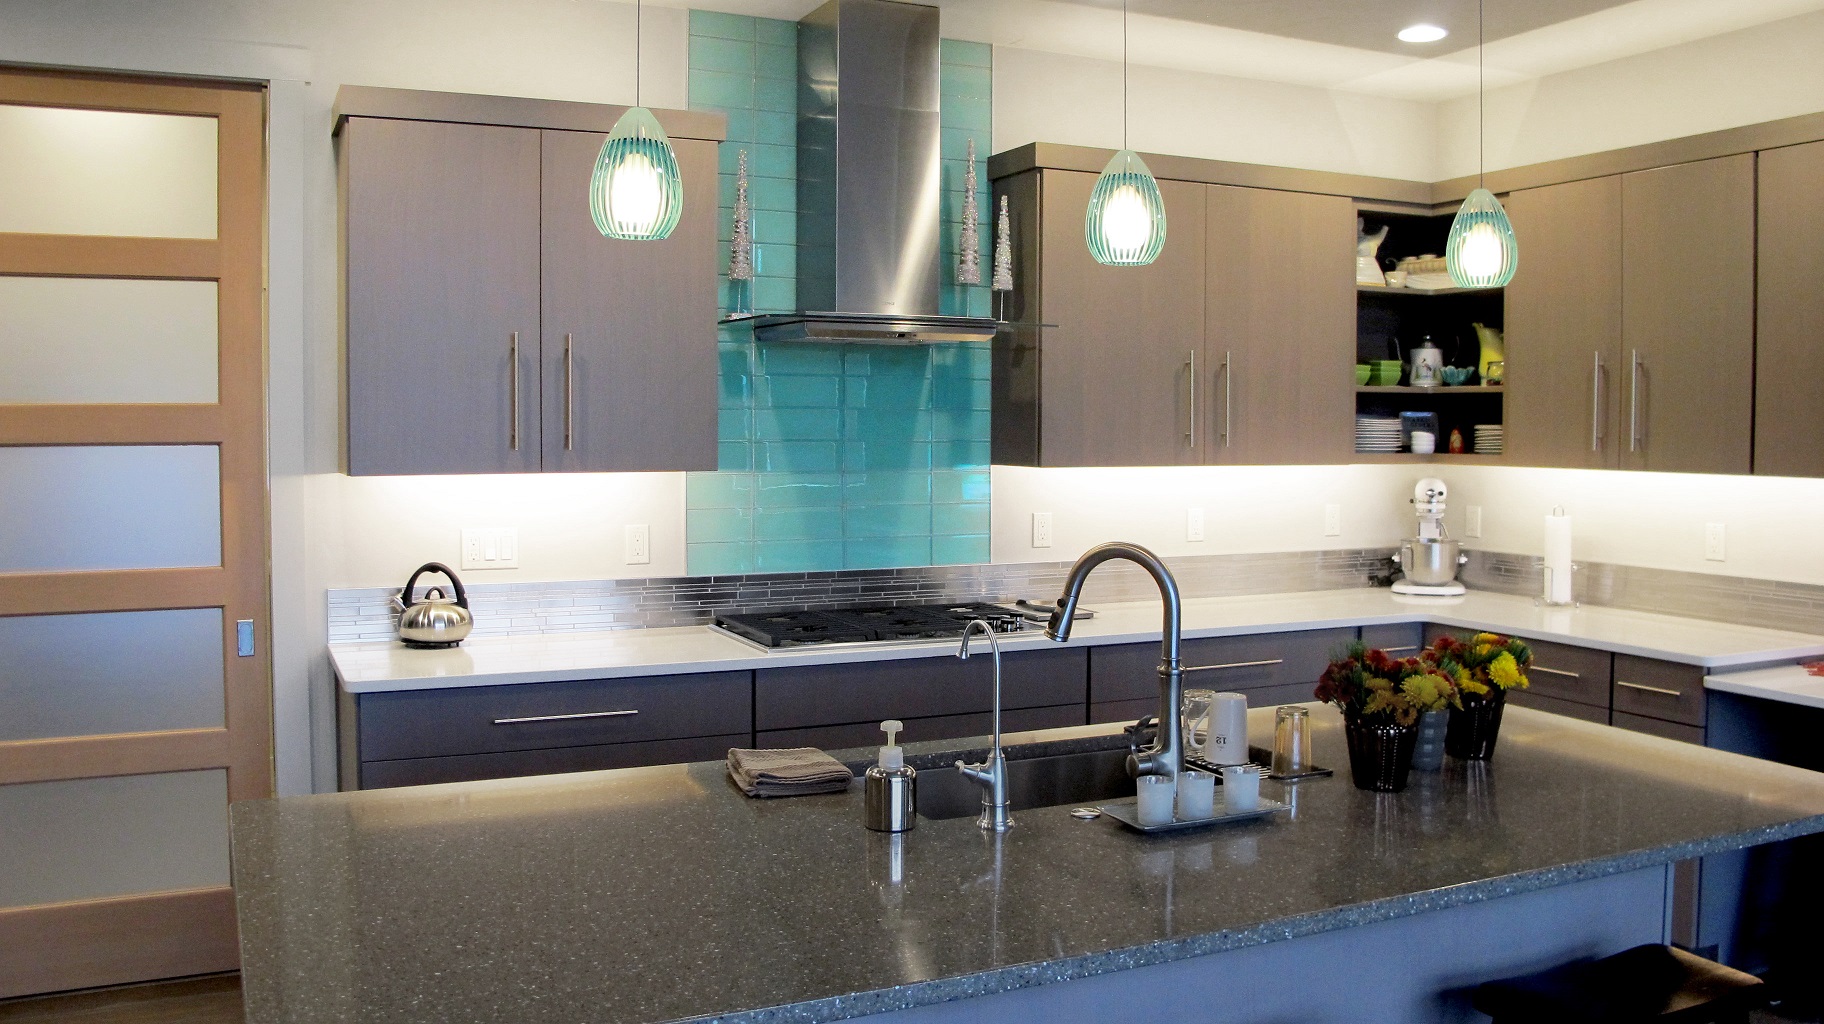 Aqua Blue Crystile 4x12 glass field tile Glazzio Soft Mint above a gas cook top arctic grey cabinets in the kitchen with Pental quartz perimeter. 